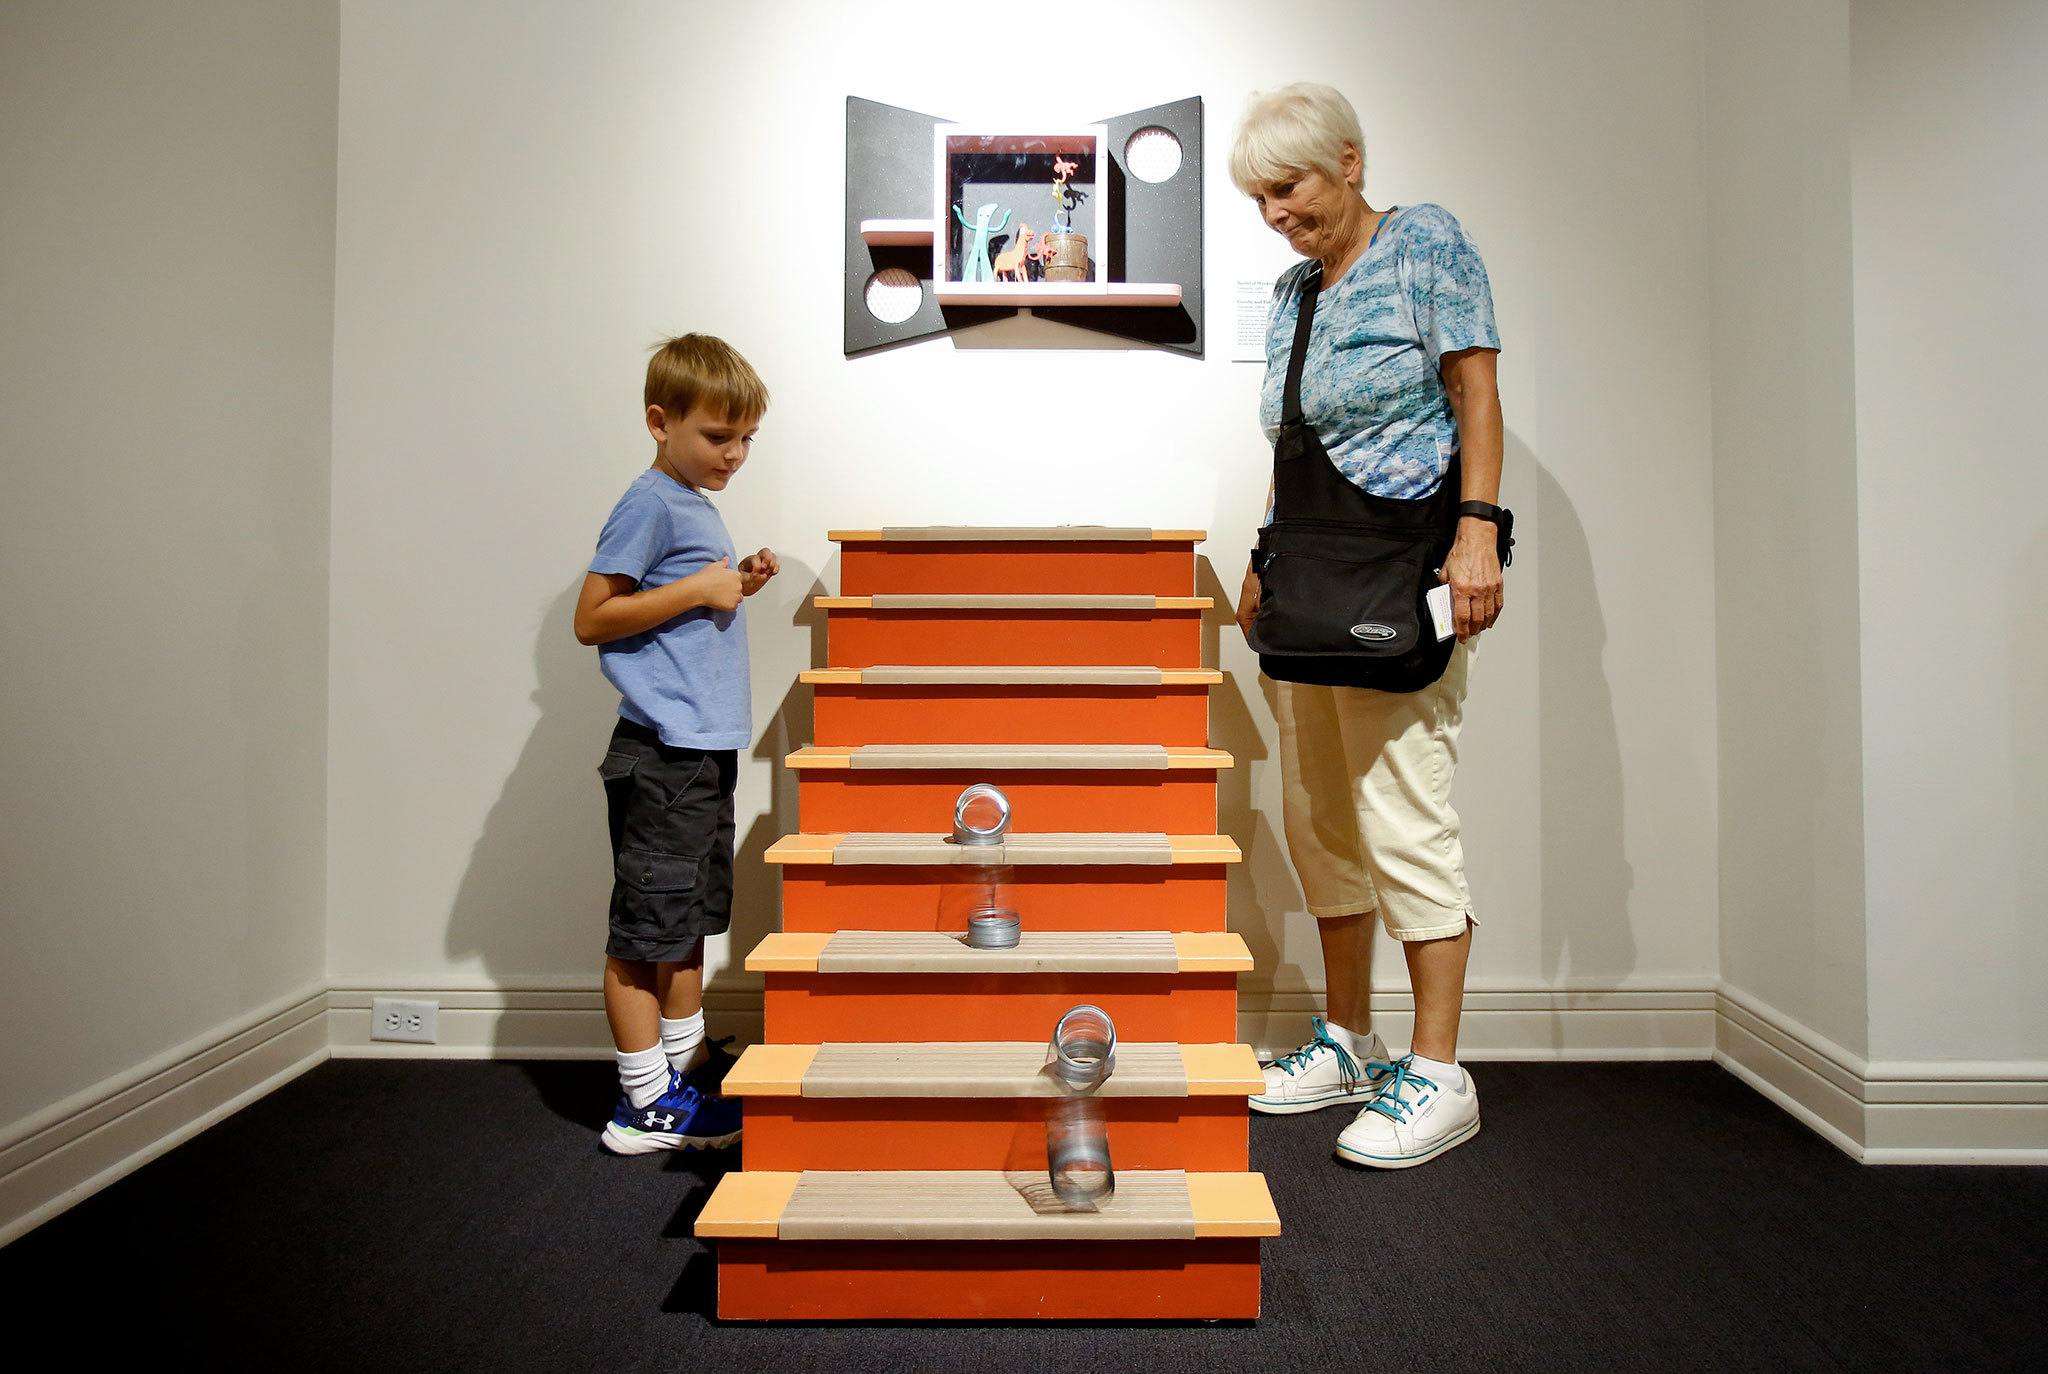 Kai Quaale, 6, and his grandmother, Cindy Andre, race Slinkies down a staircase at the West Coast premiere of Toys of the ’50s, ’60s and ’70s exhibit in the Museum of History & Industry in Seattle. The exhibit is scheduled through Sept. 25. ( Andy Bronson / The Herald )